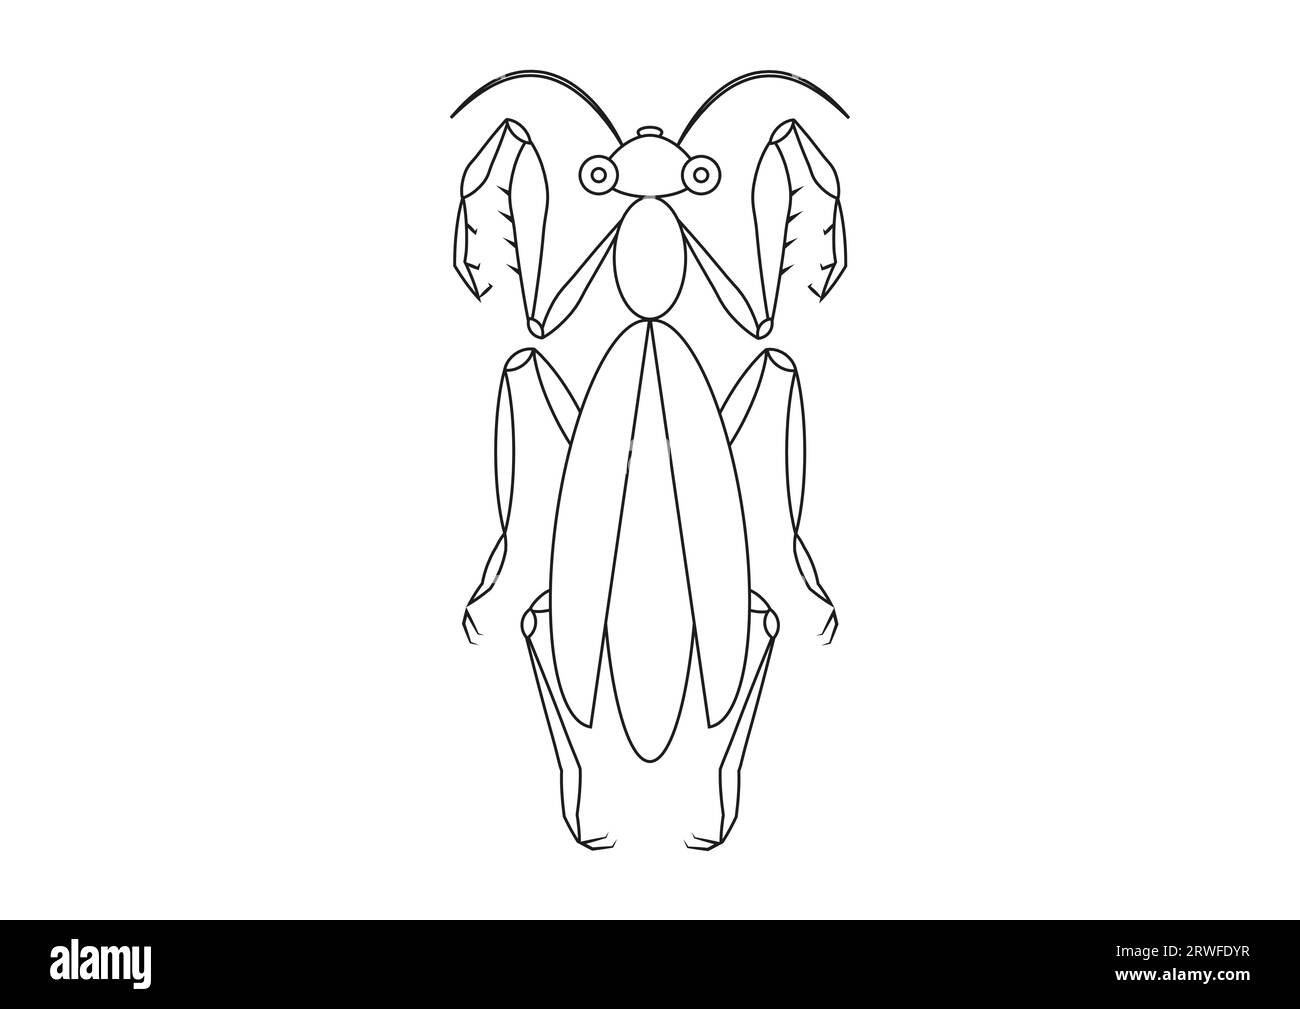 Black and White Praying Mantis Clipart. Coloring Page of a Grasshopper Stock Vector